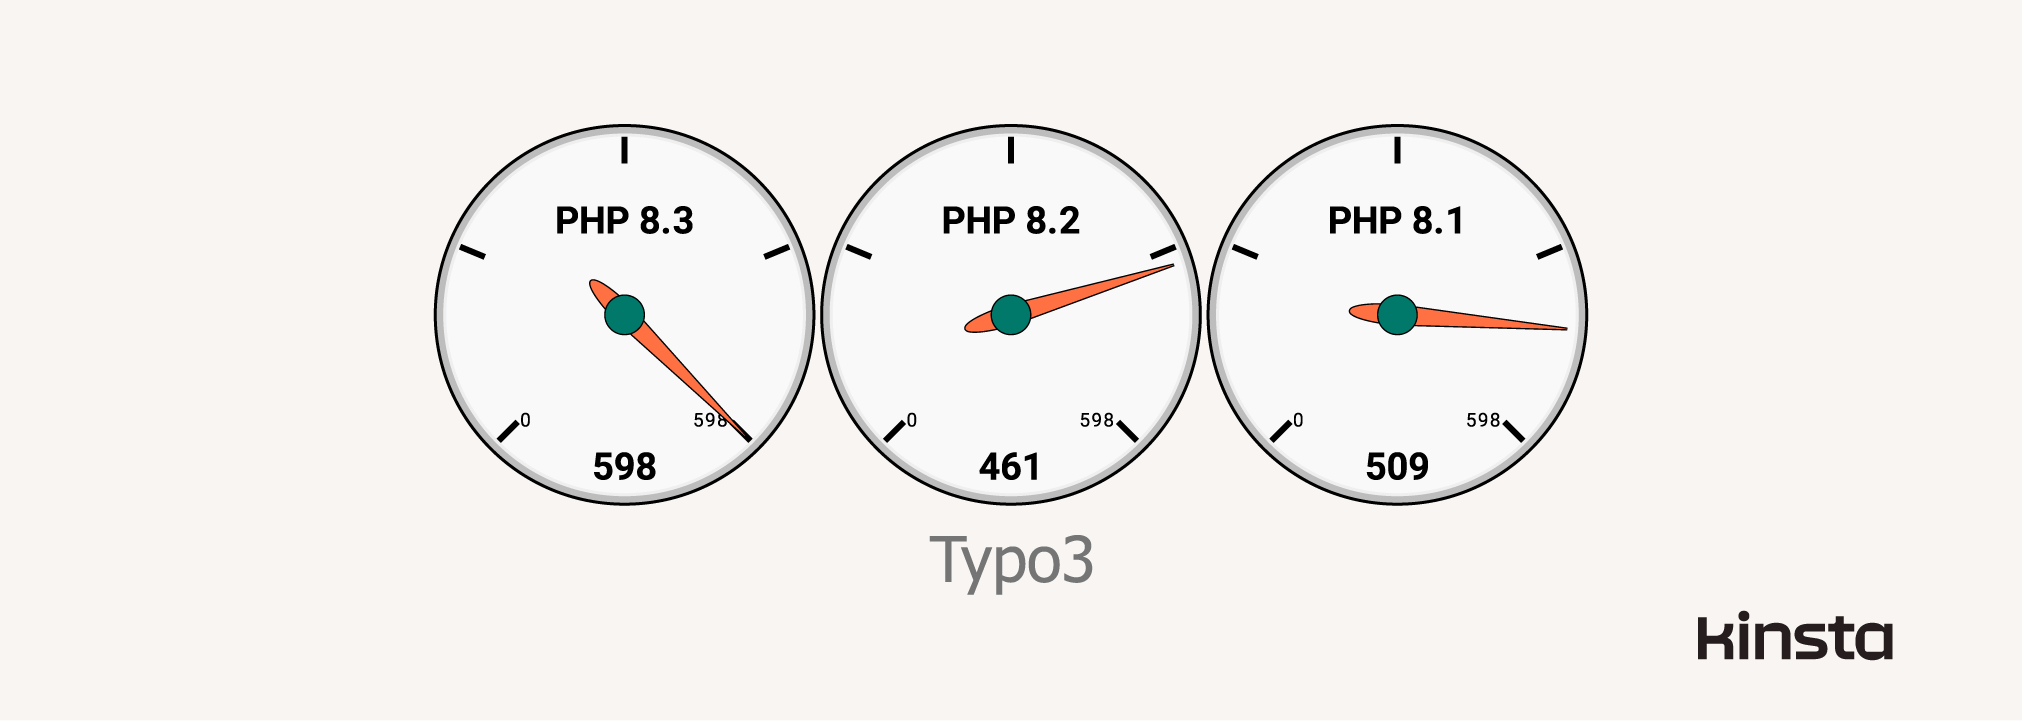 Typo3 12.4.4 performance on PHP 8.1, 8.2, and 8.3 (in requests/second).